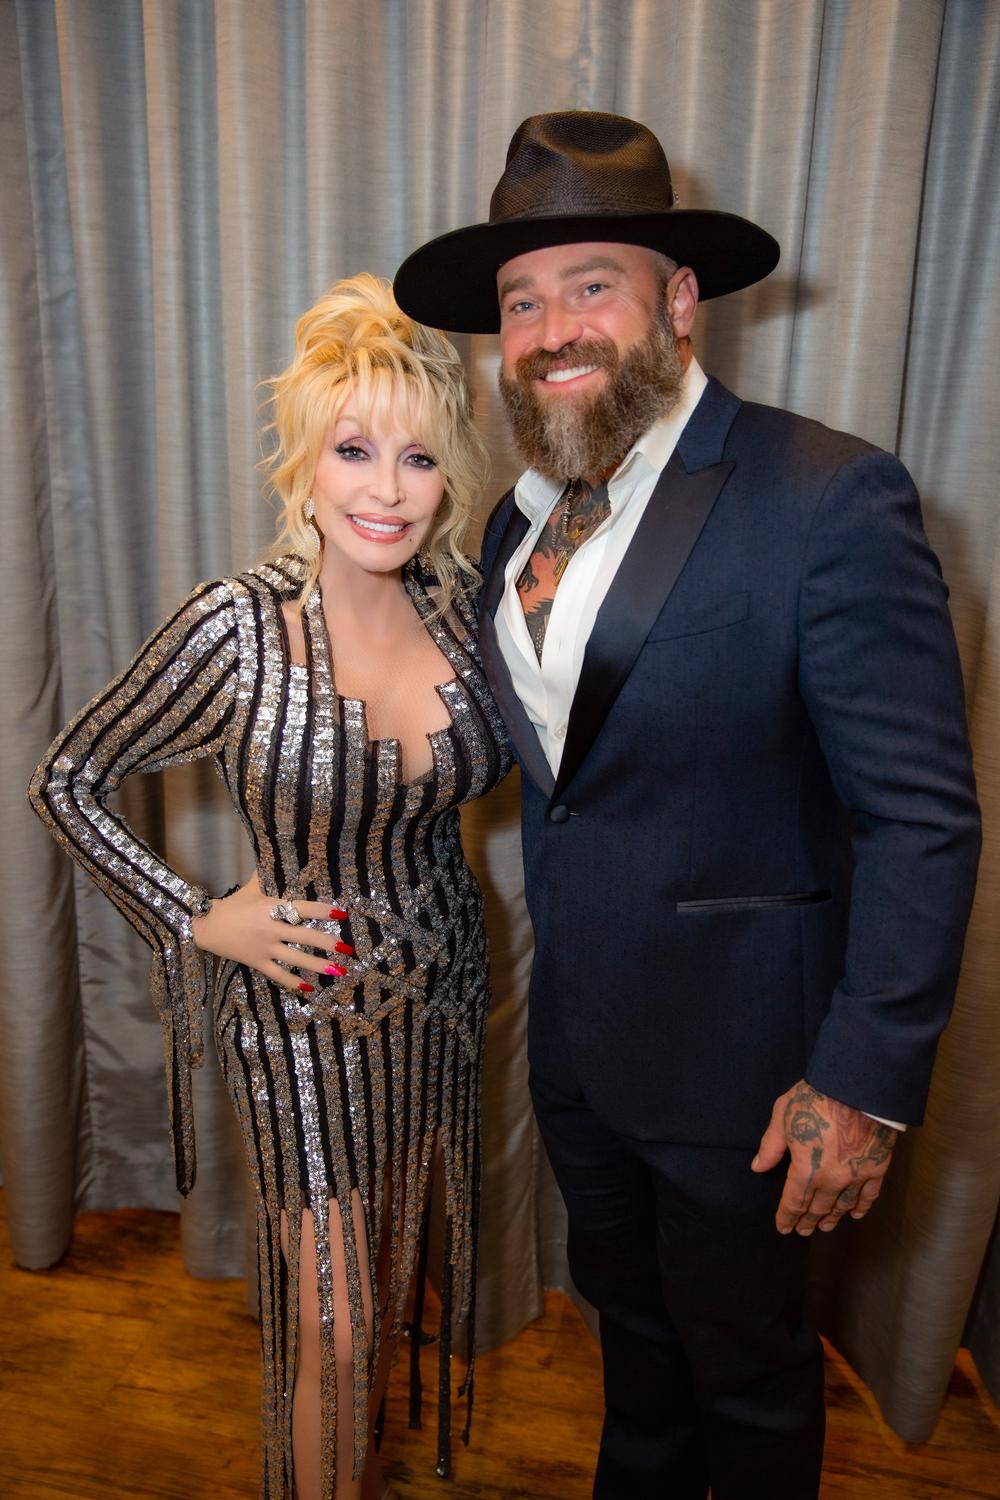 Dolly Parton and Zac Brown at the 2022 Rock and Roll Hall of Fame Induction Ceremony in Los Angeles on Nov. 5, 2022